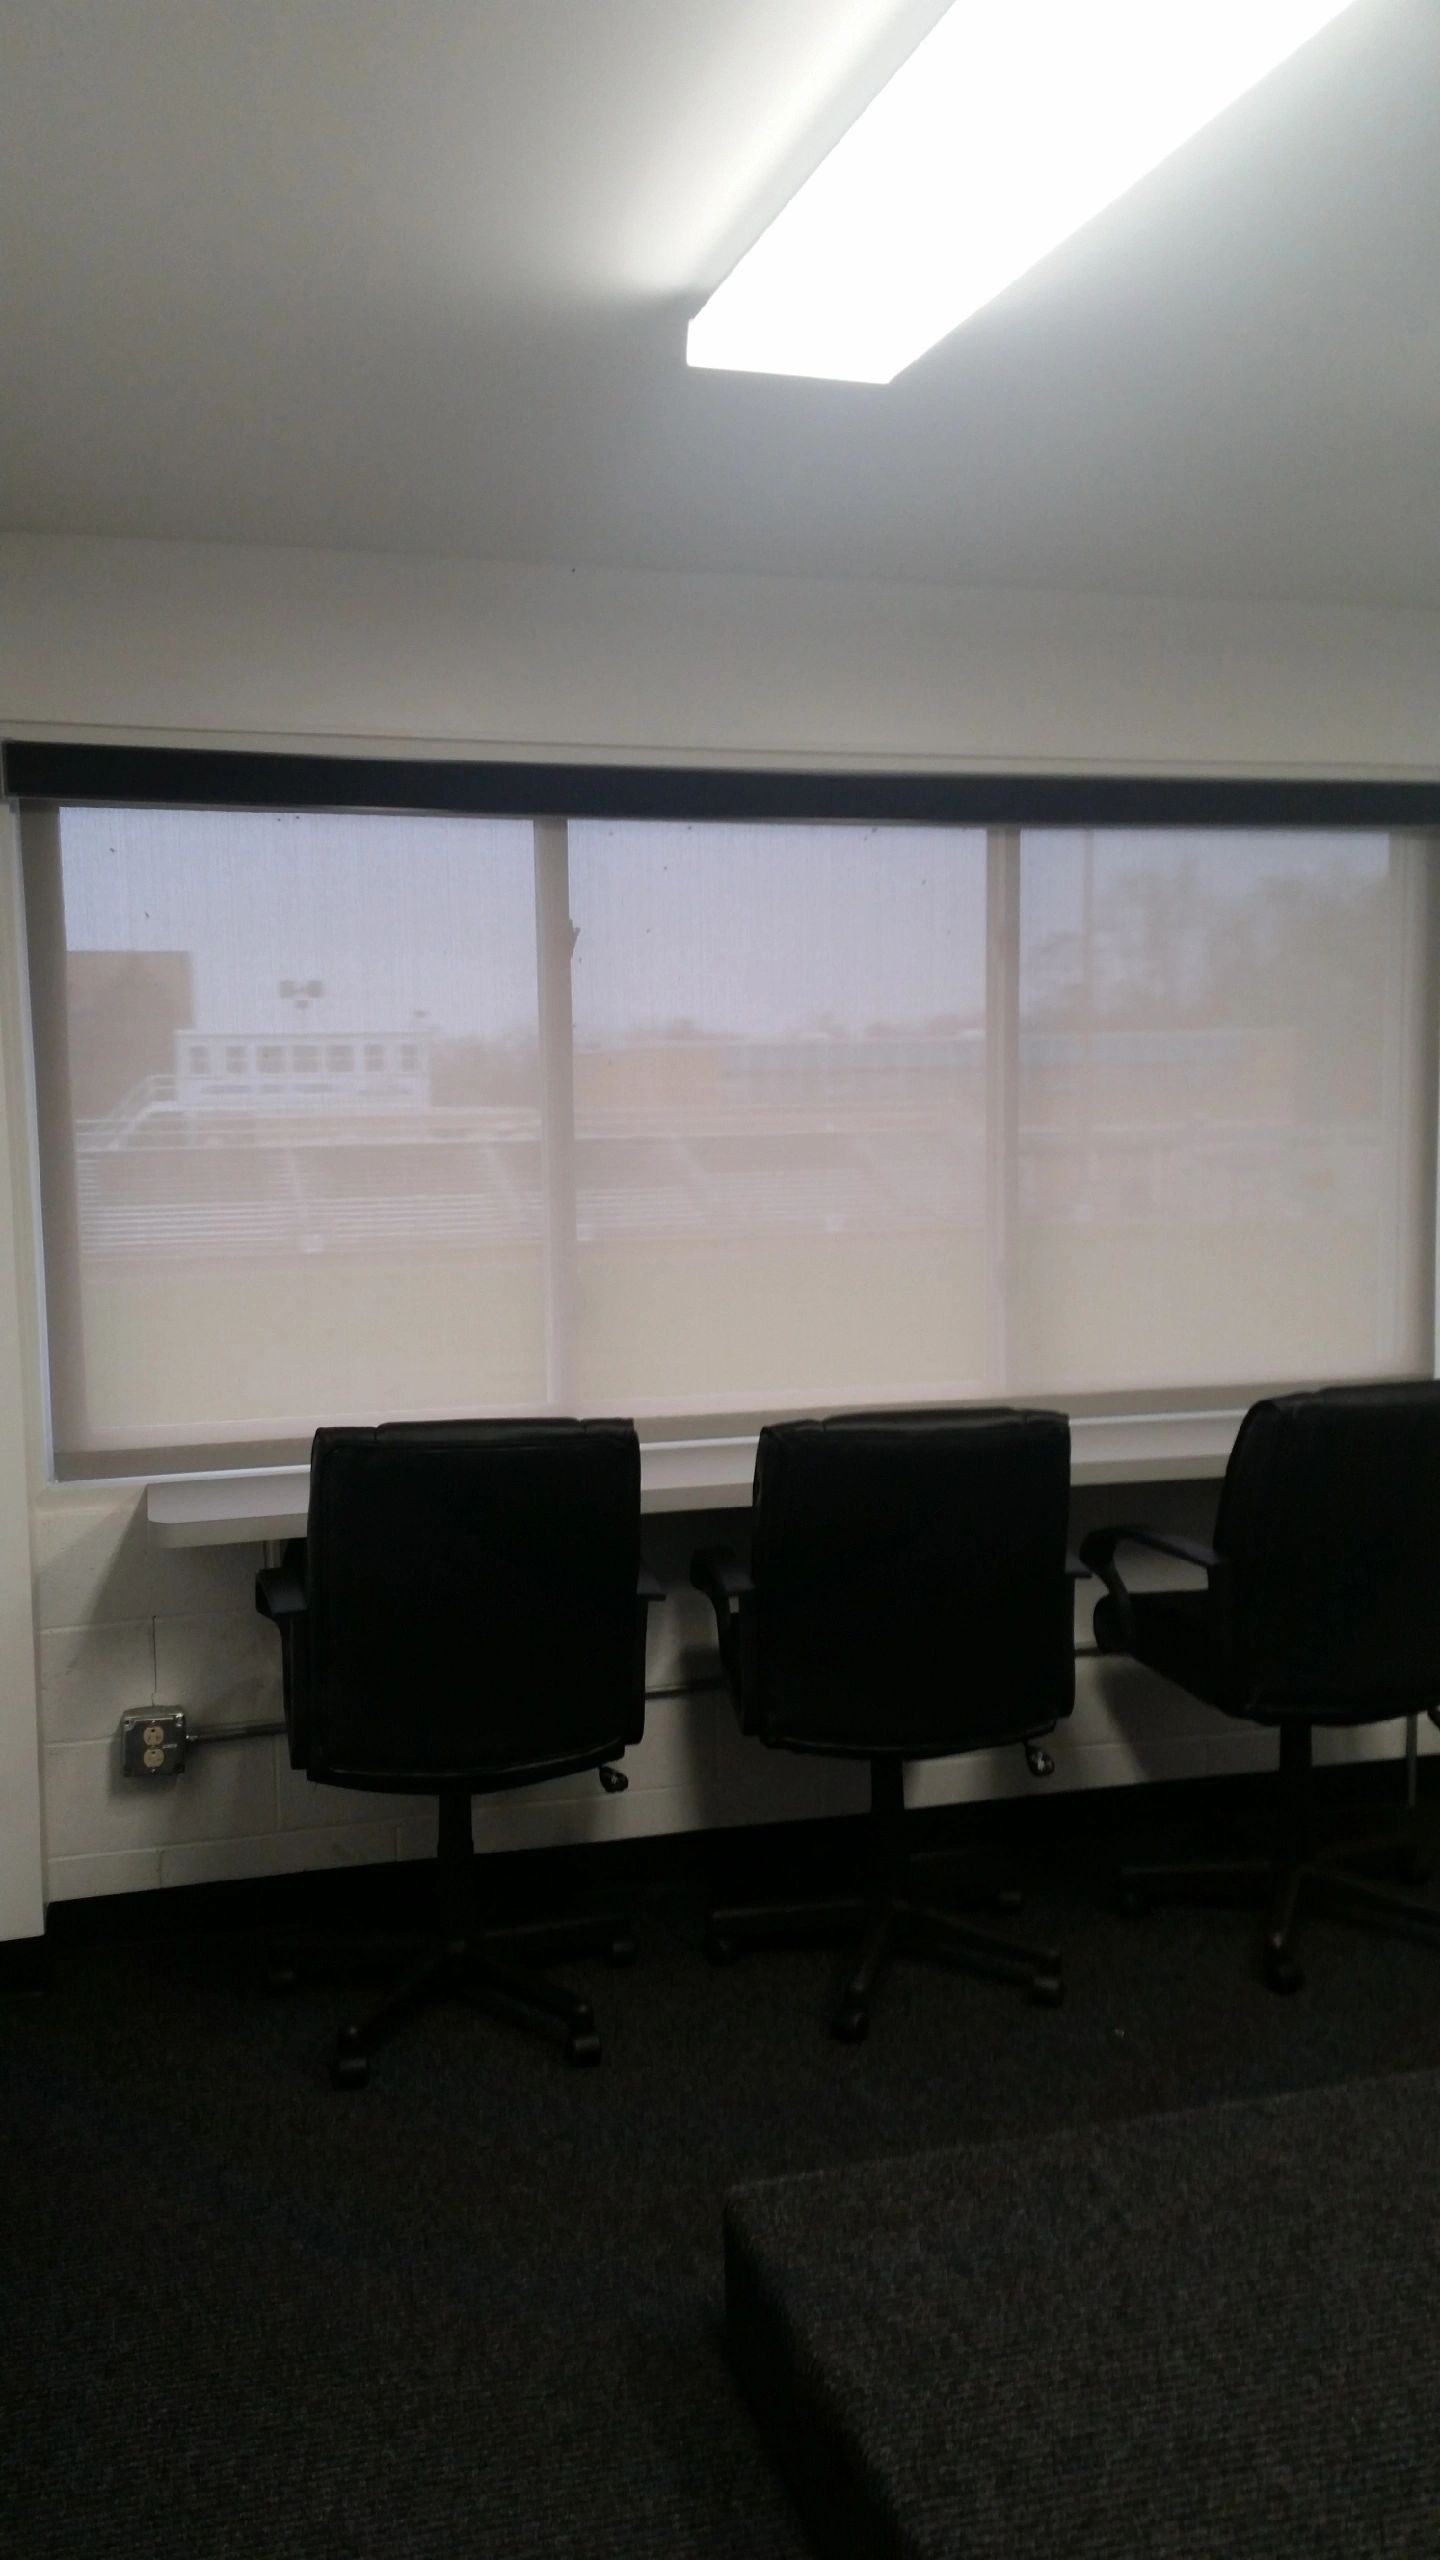 3% roller shades and blinds with a Standard valance